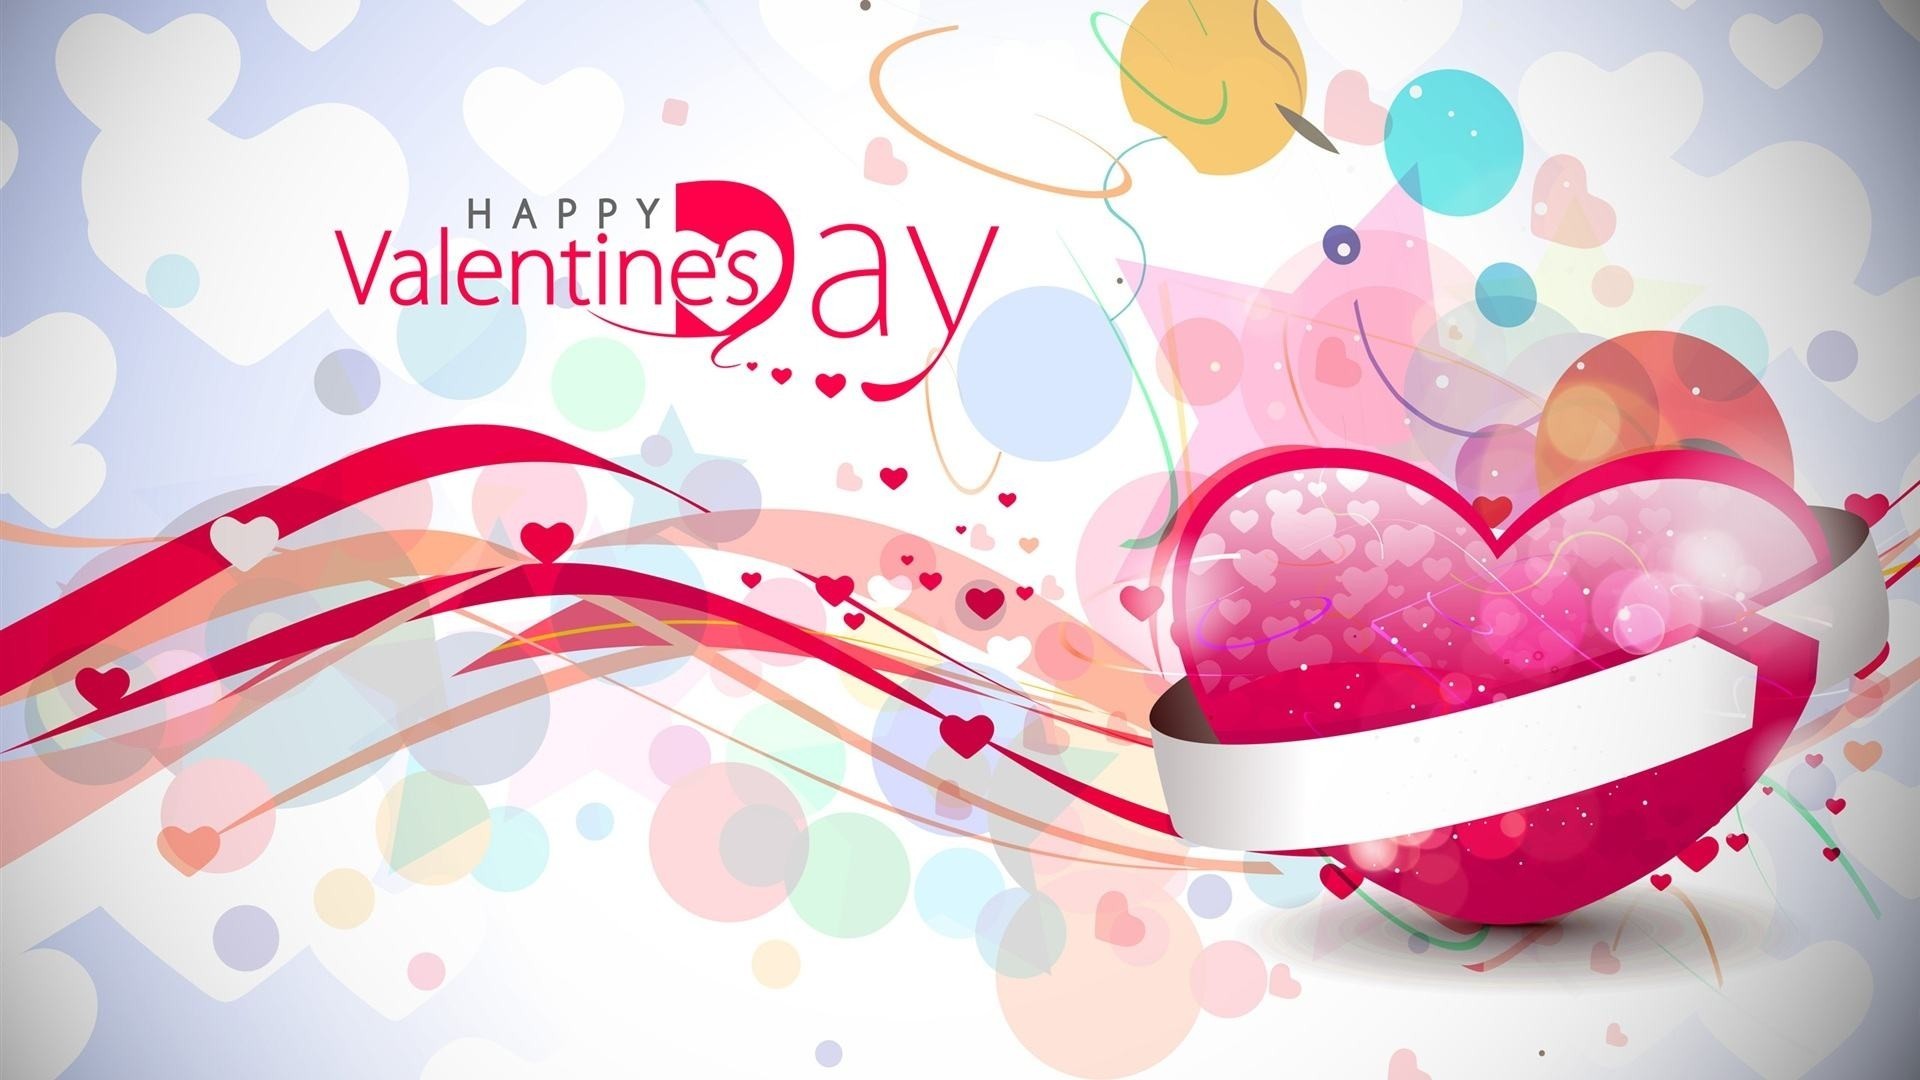 1920x1080  Wallpapers Backgrounds - Pink Cute Girly Background Abstract  Valentine1080x1080 343k